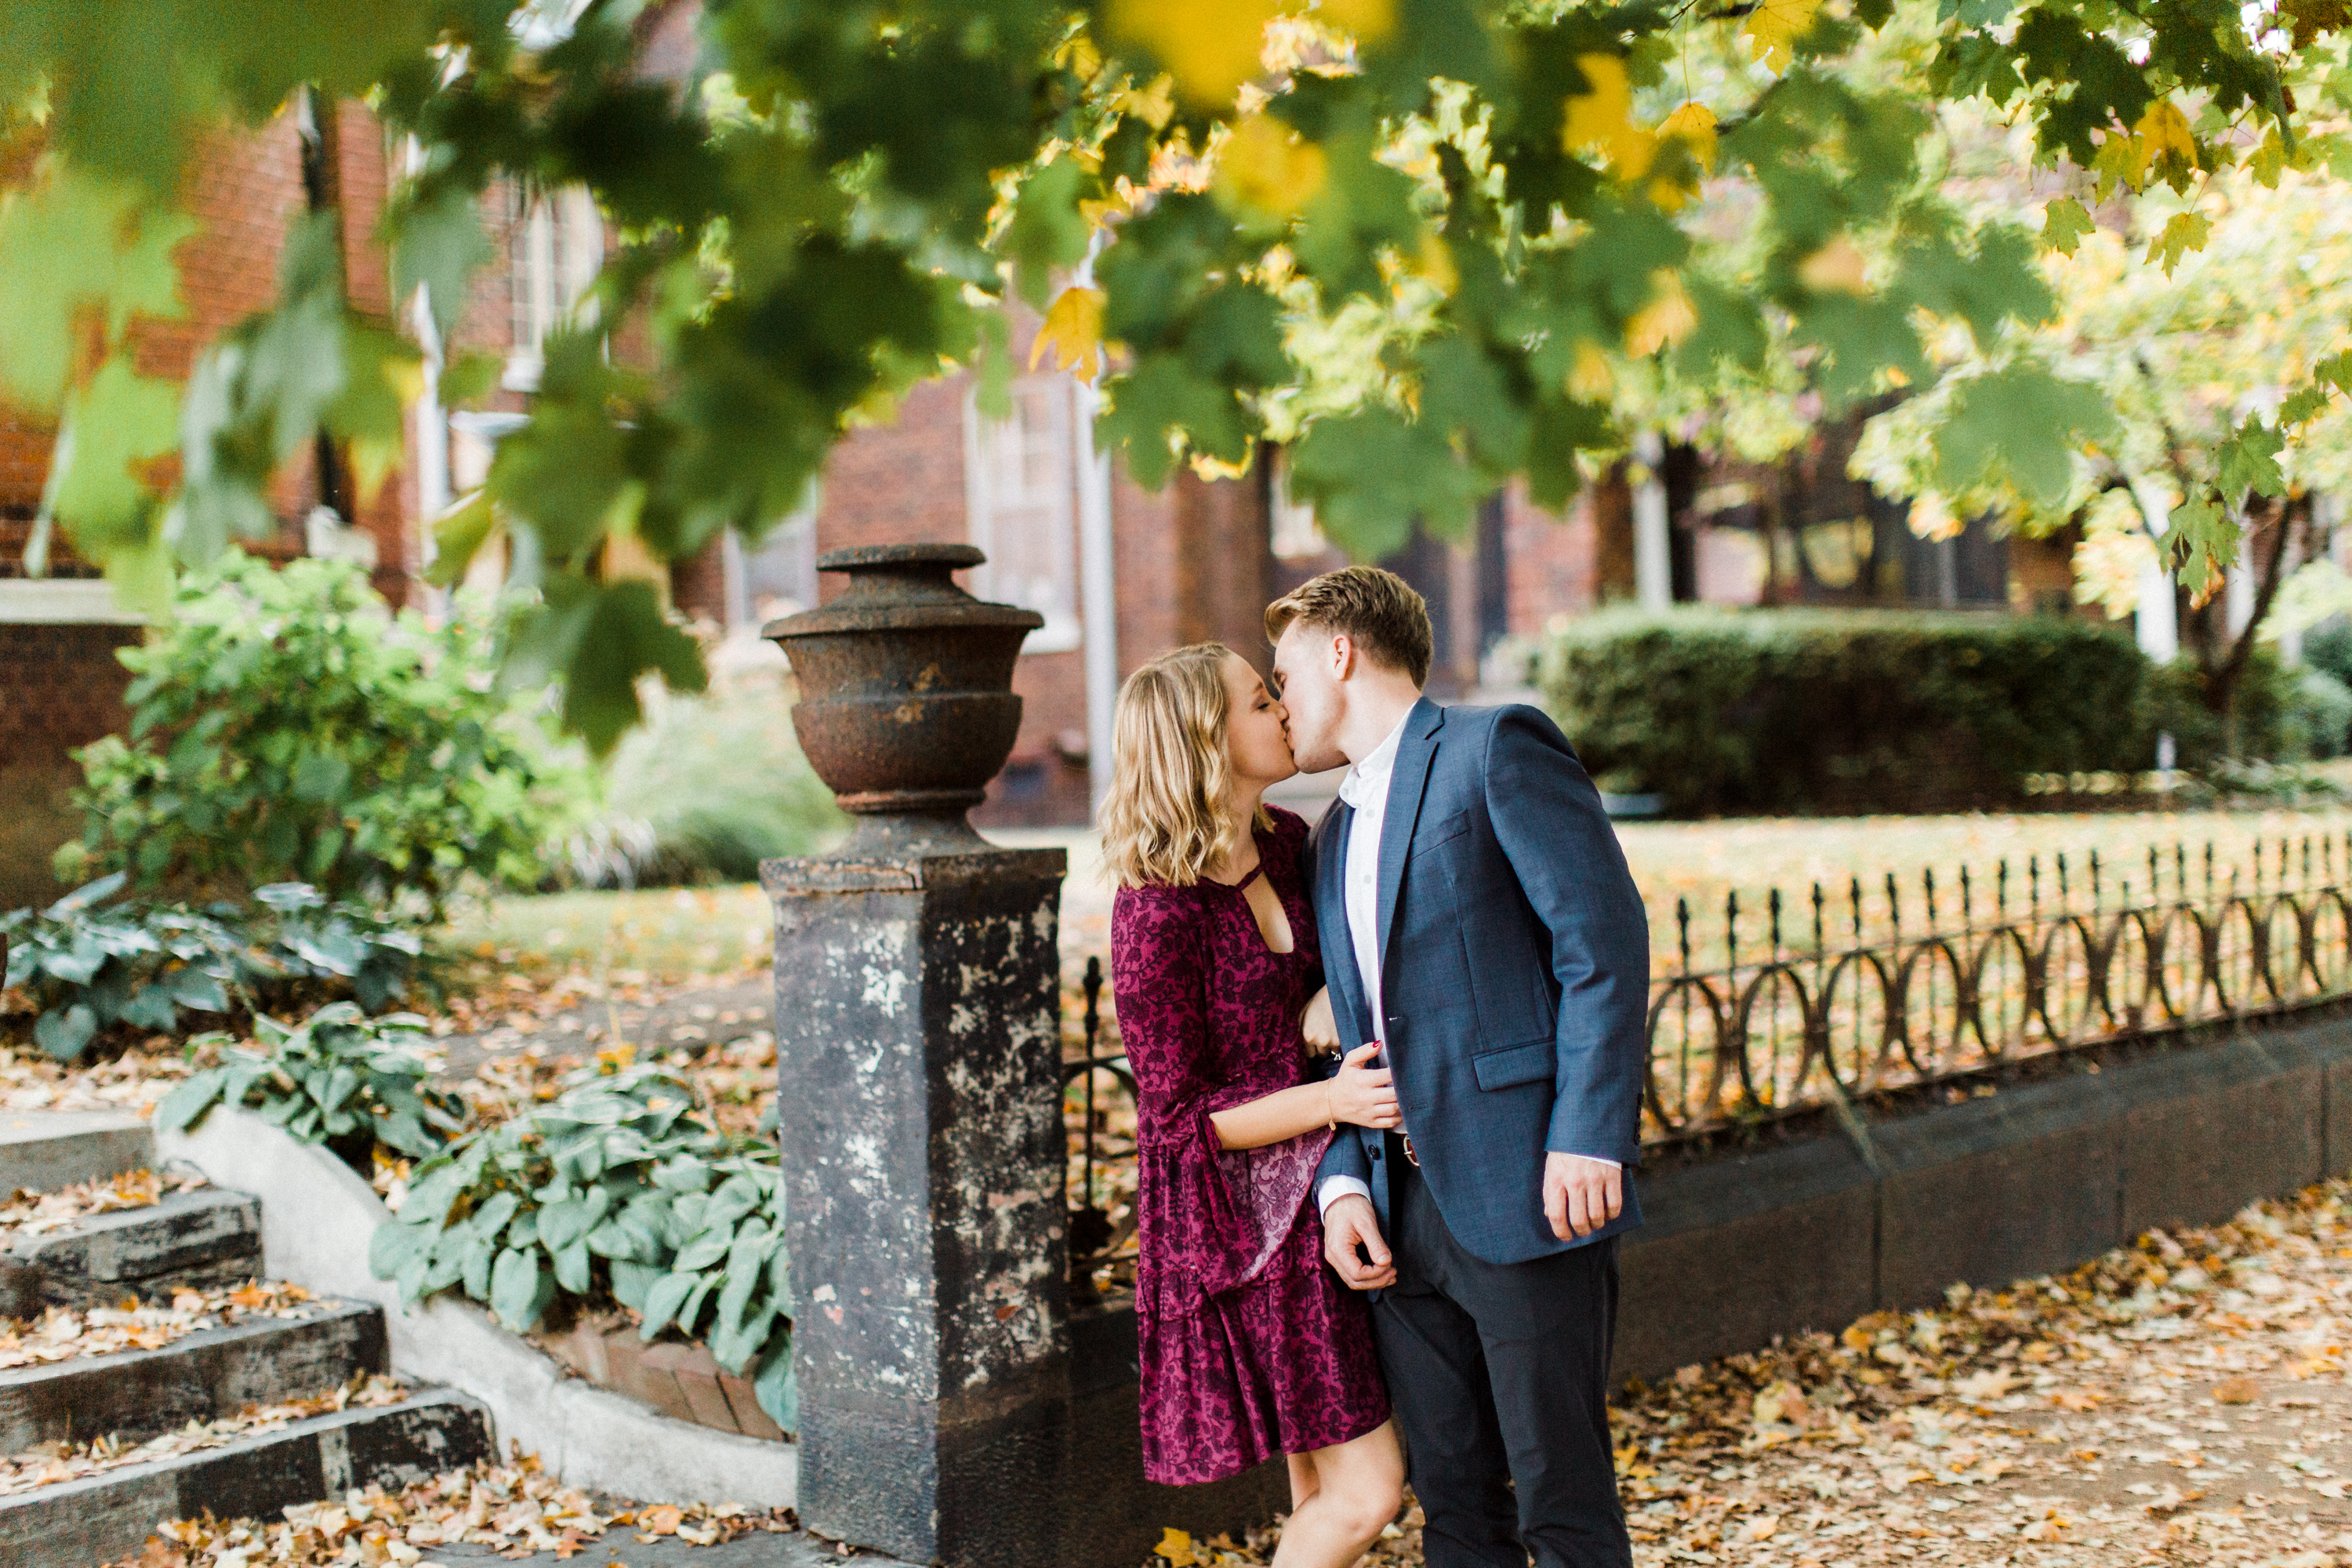 Urban engagement shoot in Downtown Evansville. Photographed by Morgan Williams Photography.